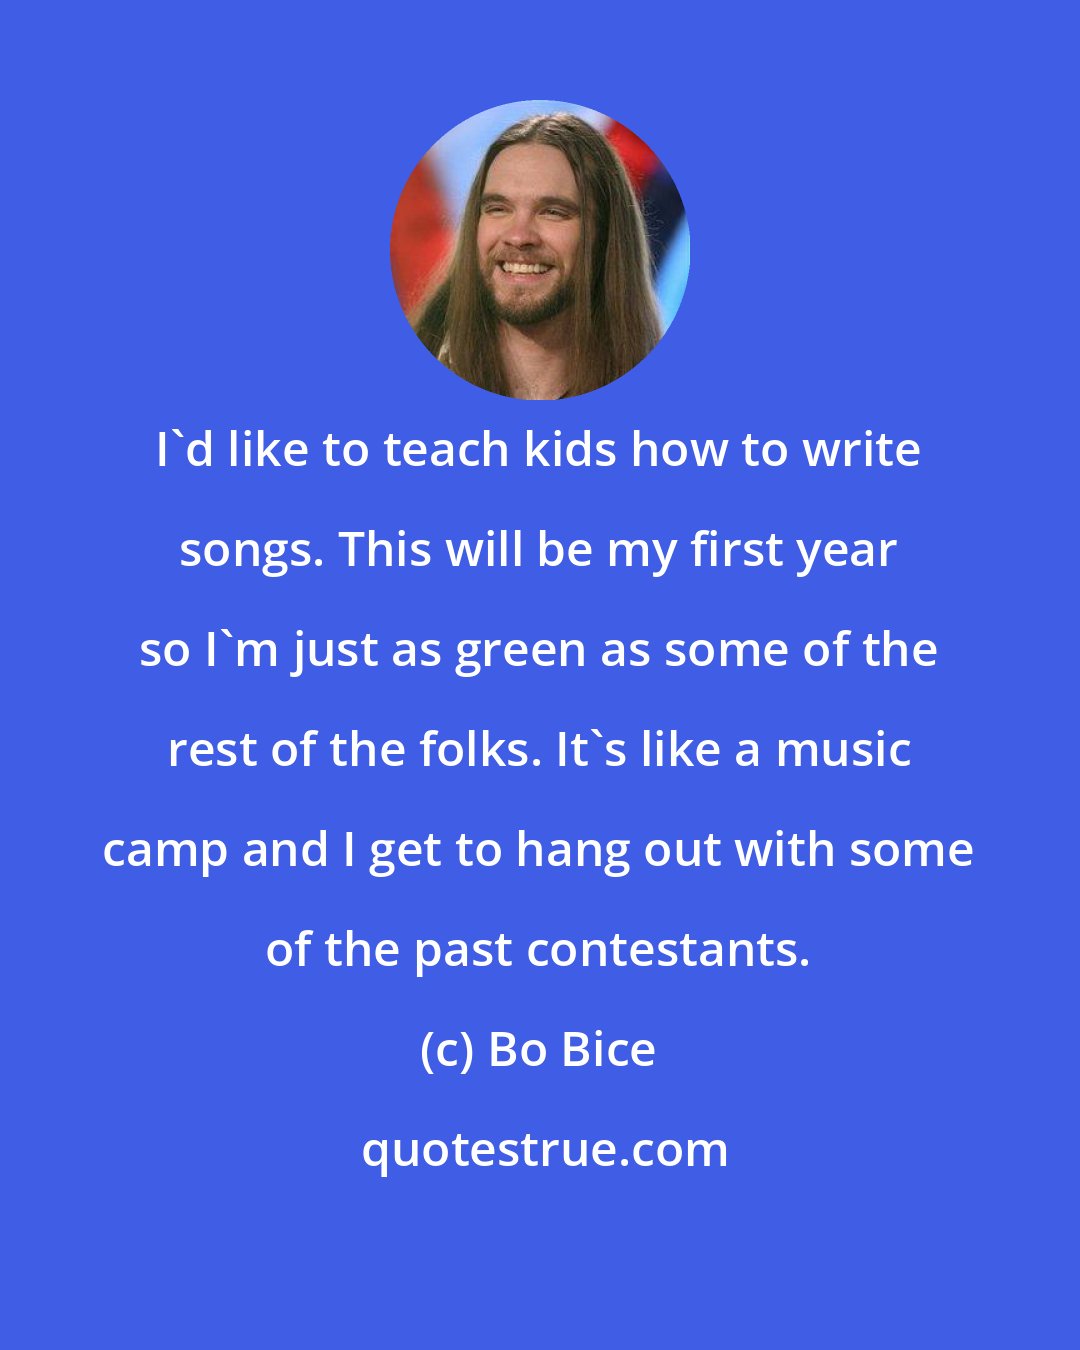 Bo Bice: I'd like to teach kids how to write songs. This will be my first year so I'm just as green as some of the rest of the folks. It's like a music camp and I get to hang out with some of the past contestants.